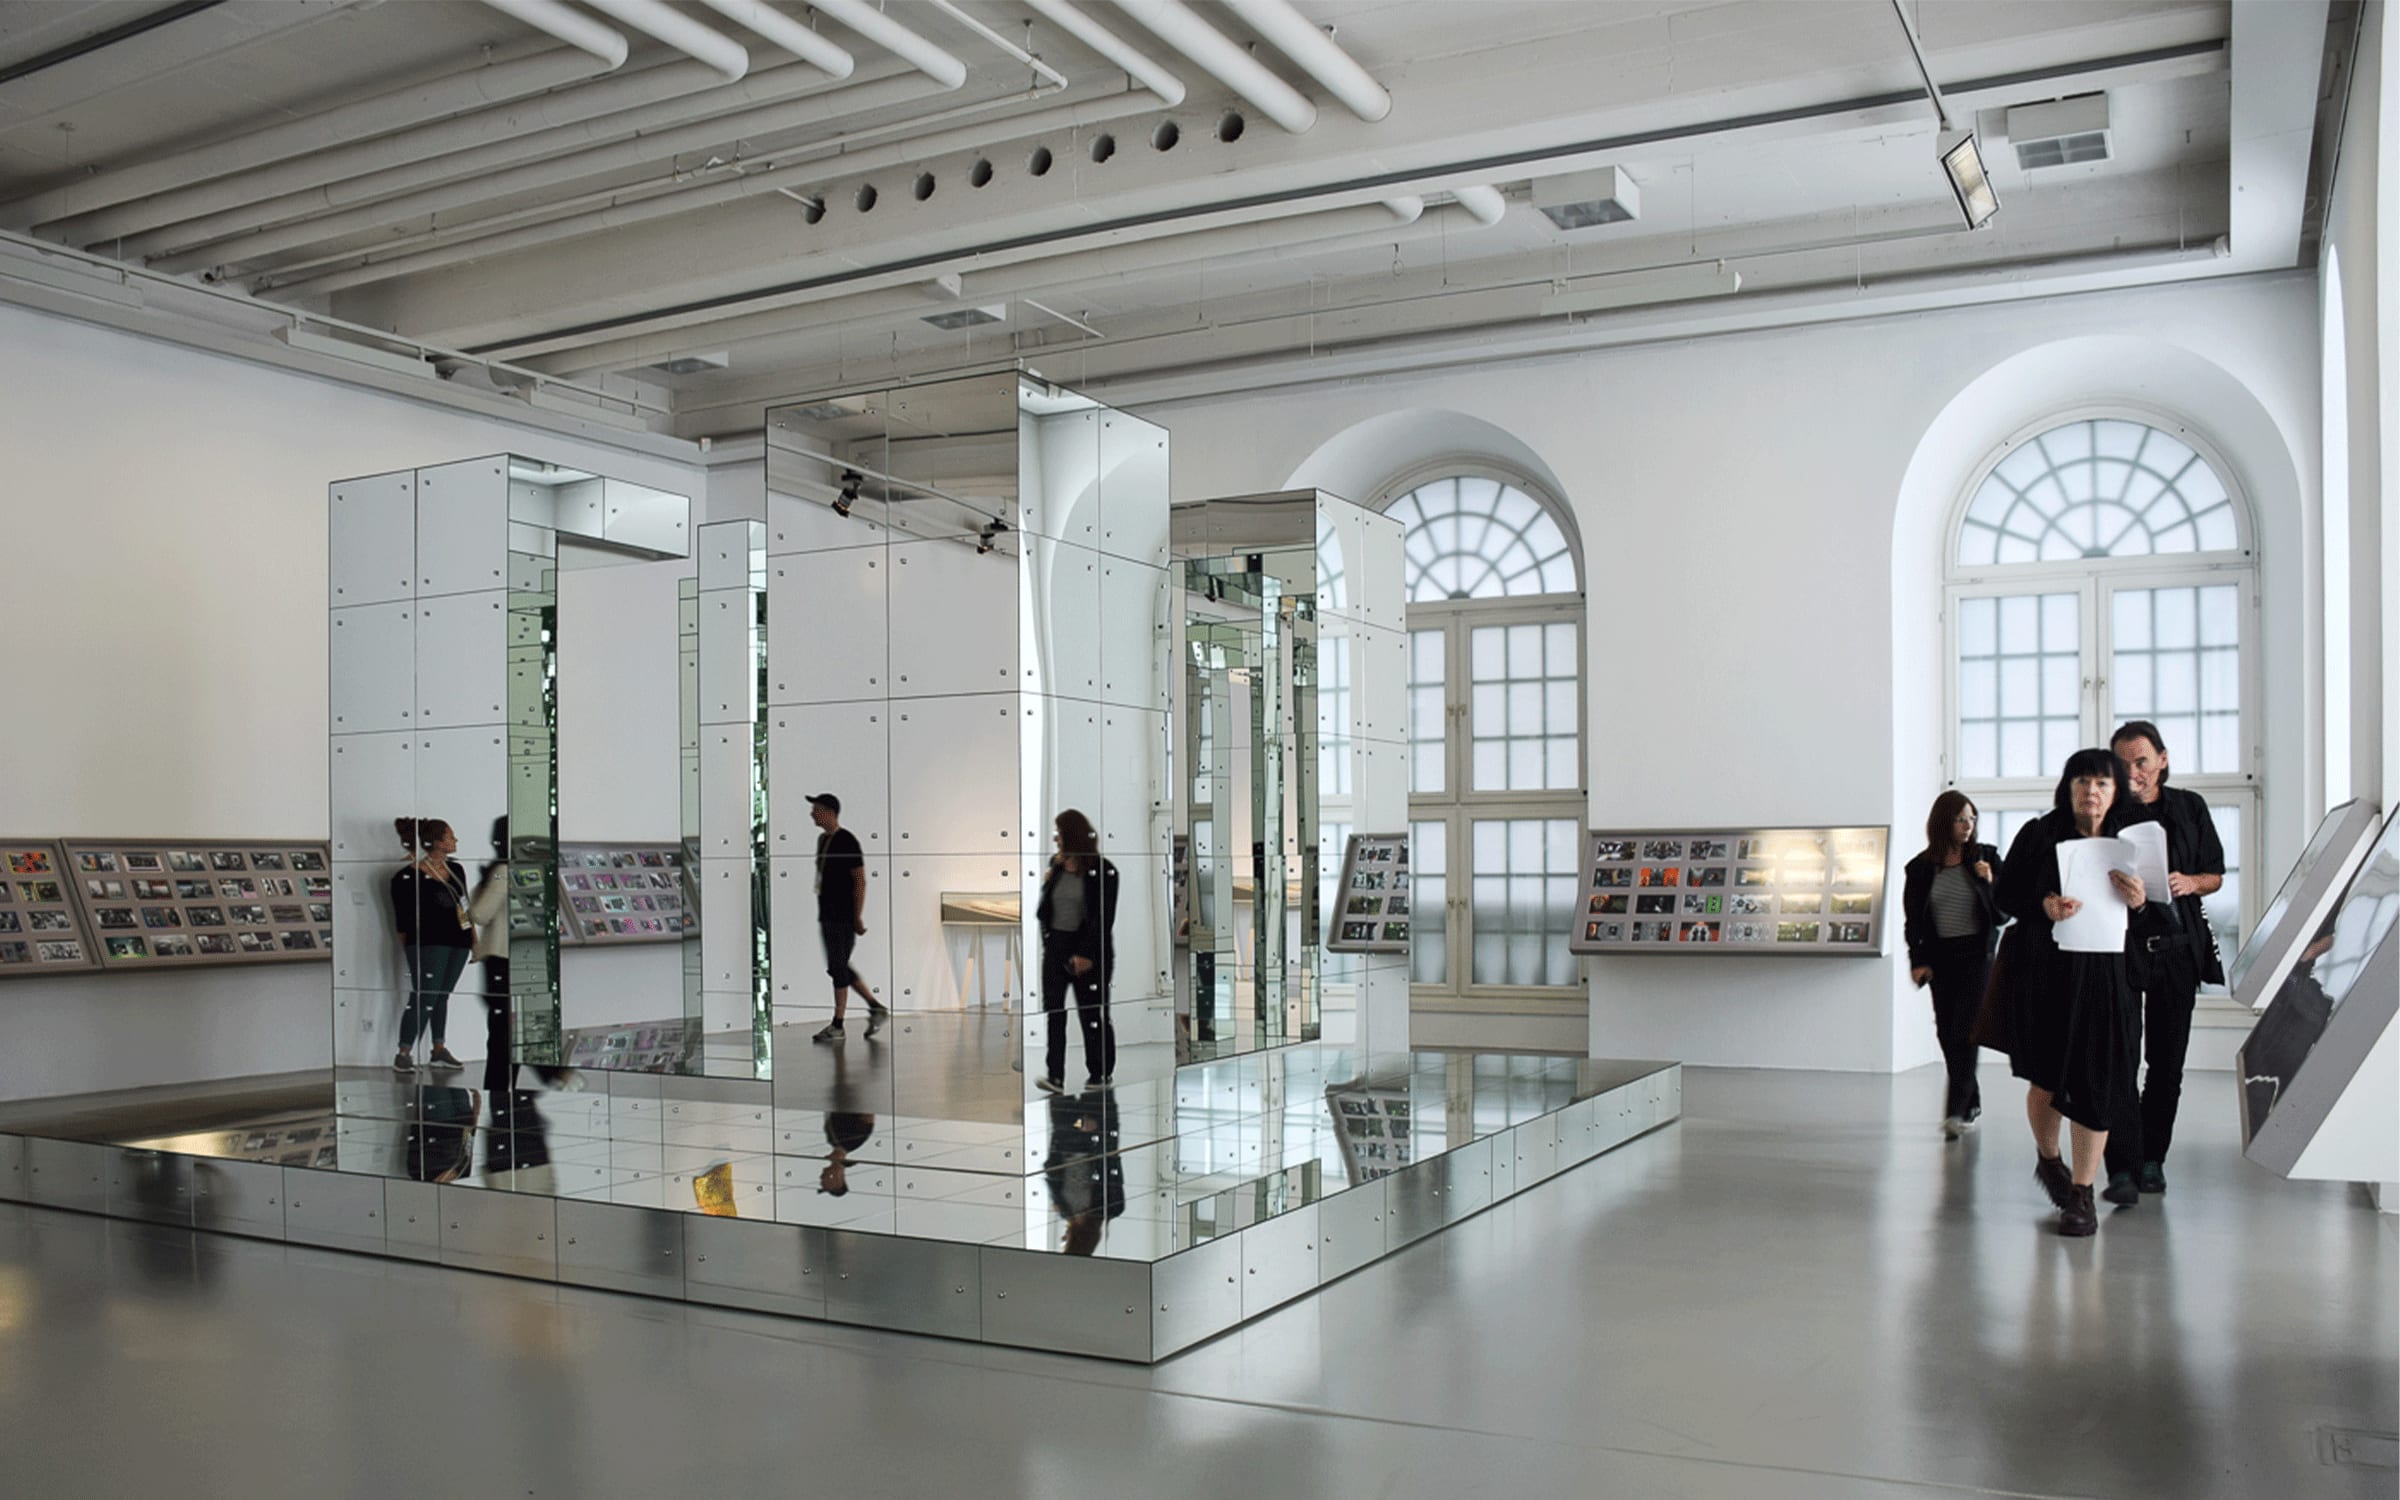 Installation view of Loucas Samaras' work at documenta 14 at EMST, National Museum of Contemporary Art, Athens, 2017.